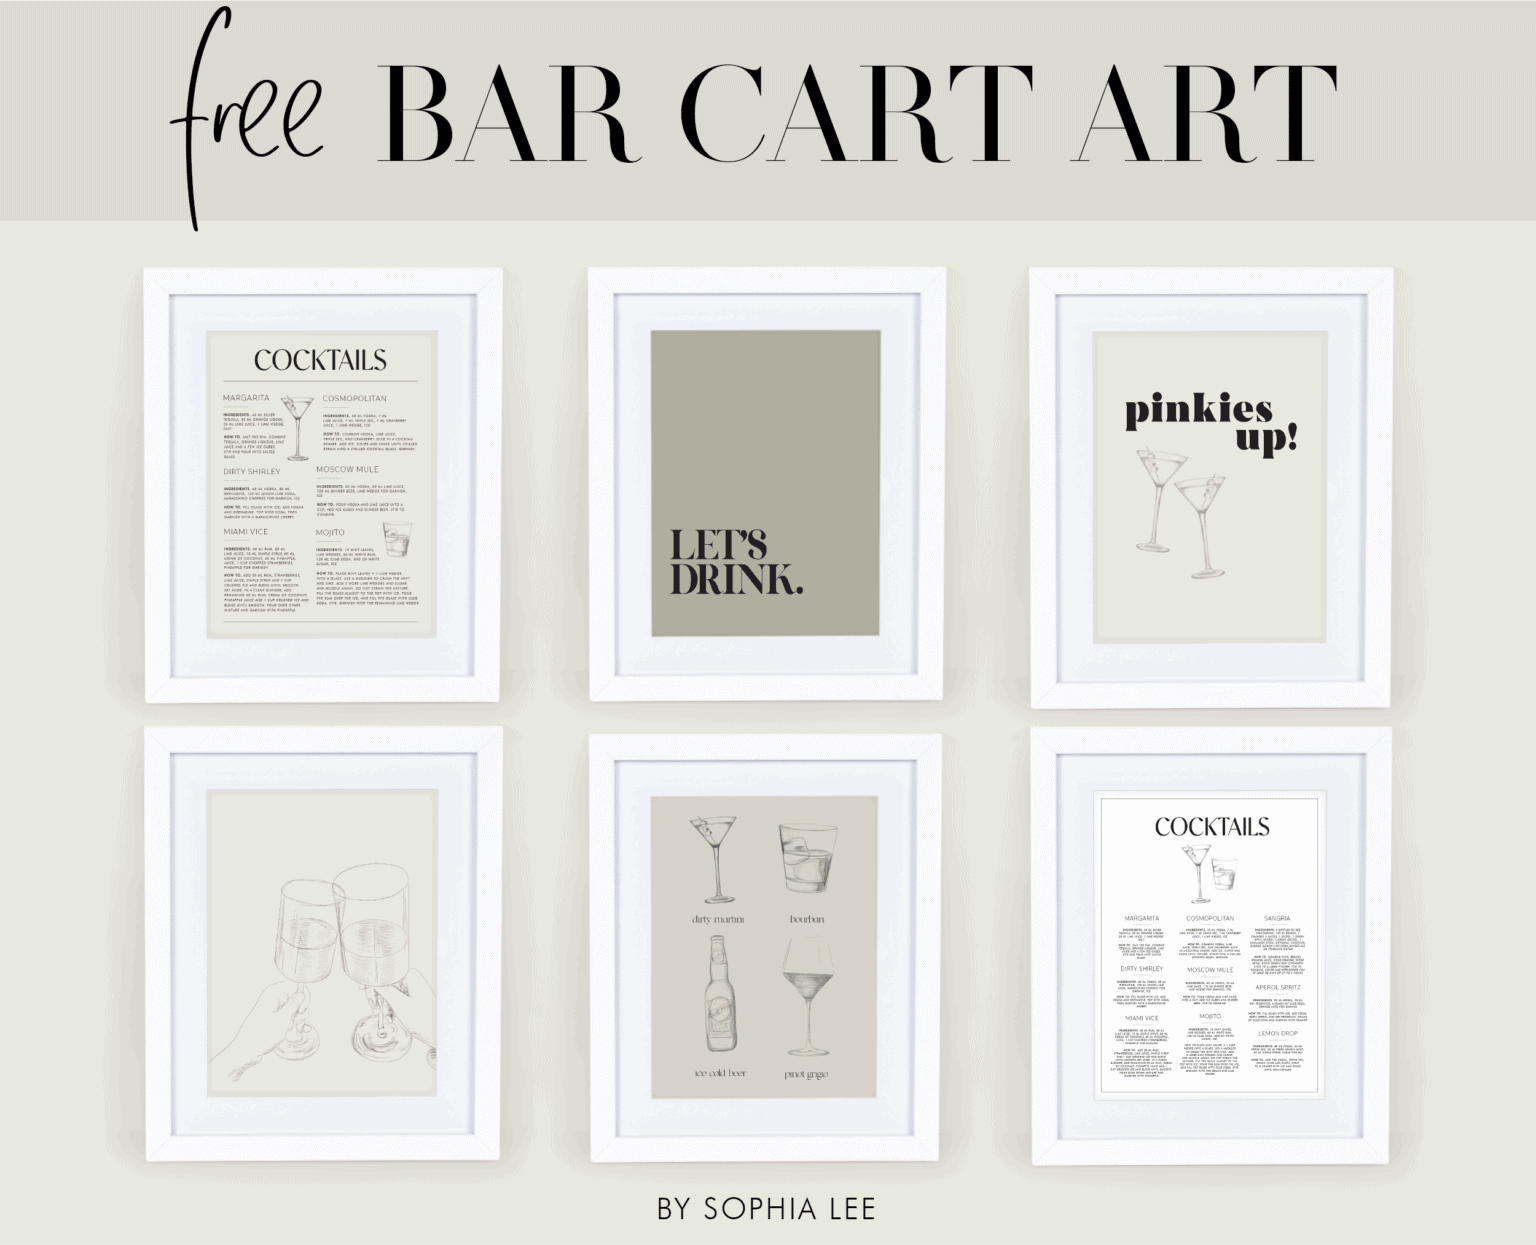 BAR CART ART 6 Free Bar Cart Printables We’re Obsessing Over By